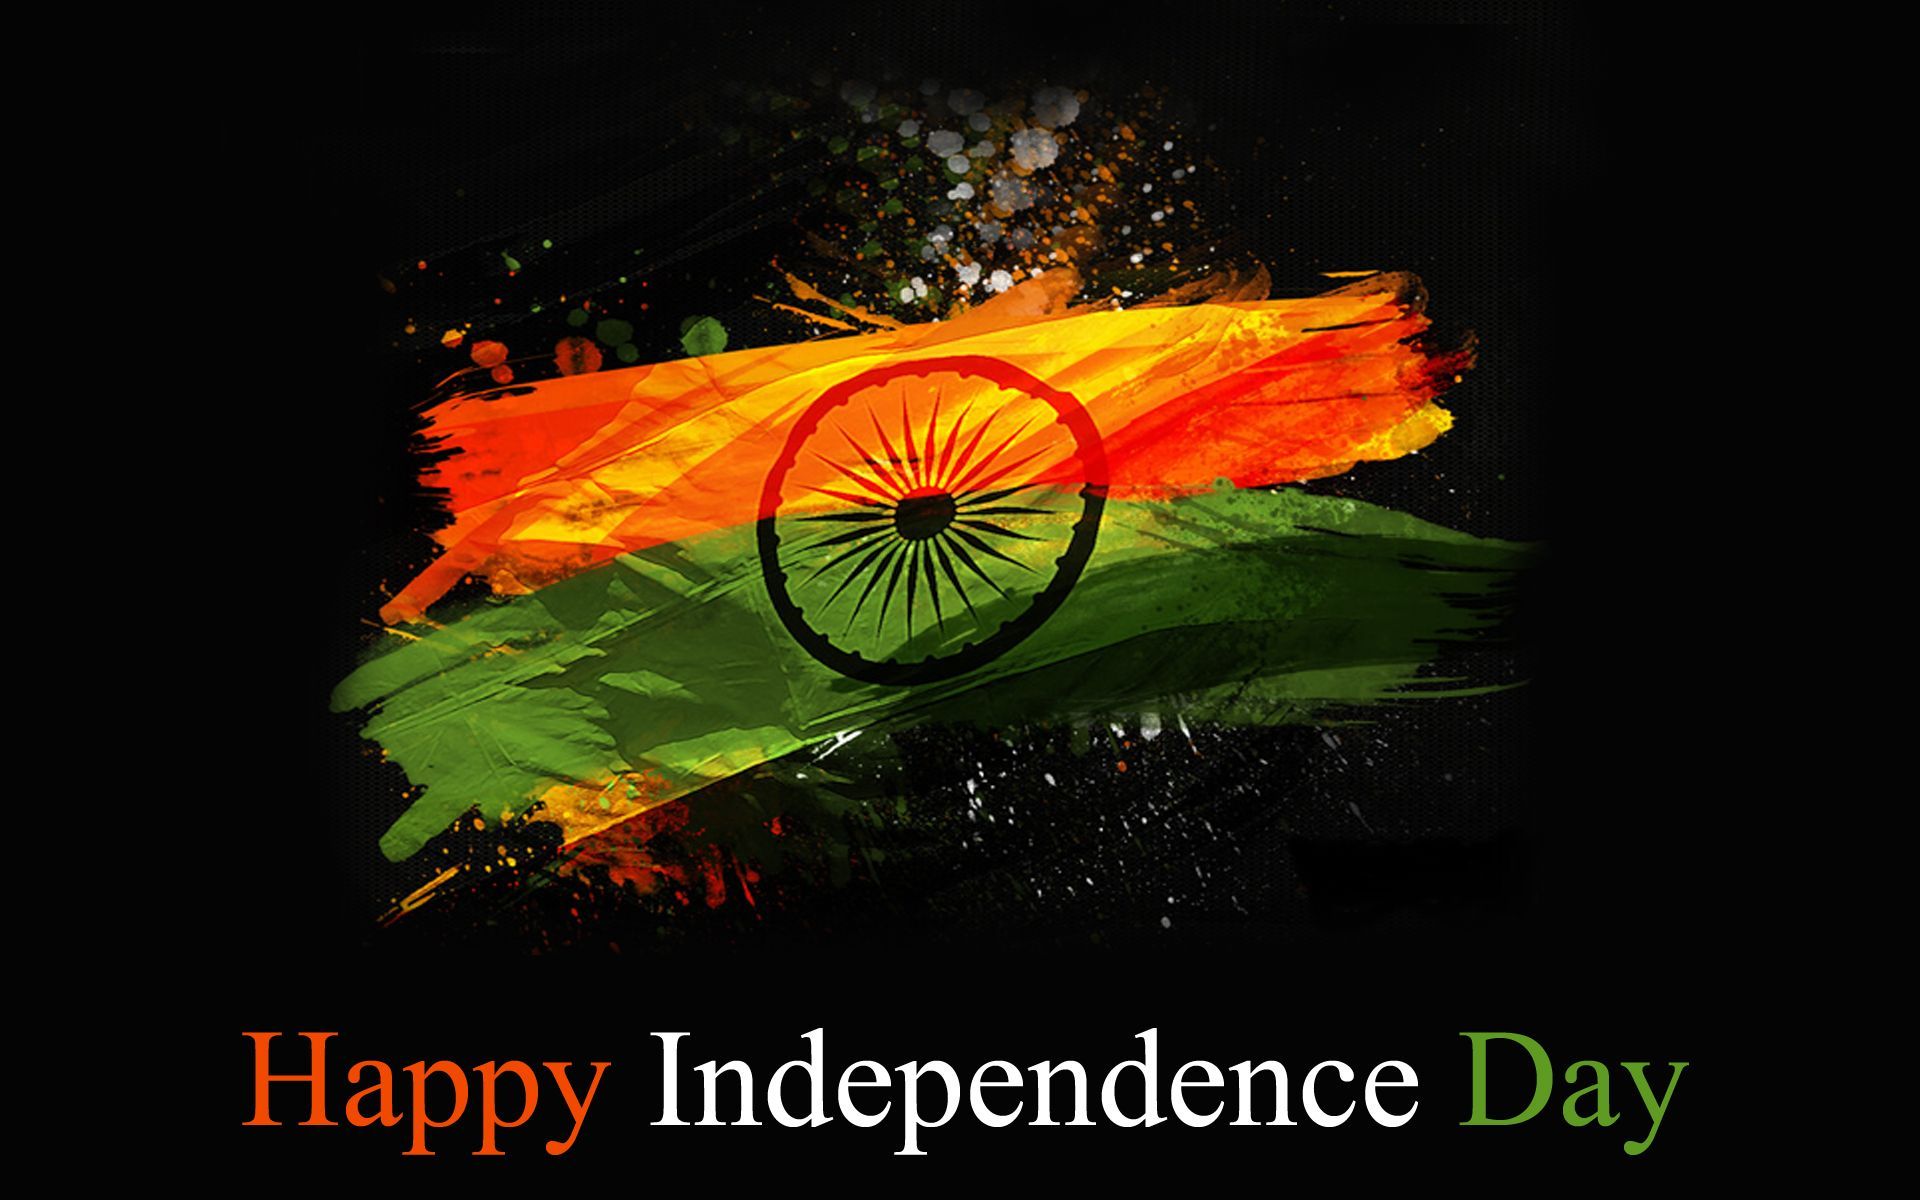 Happy Independence Day India 2019 Picture, HD Picture, 3D Image, 4k Image, And Ultra HD Wallpaper For WhatsApp And Facebook Sharing